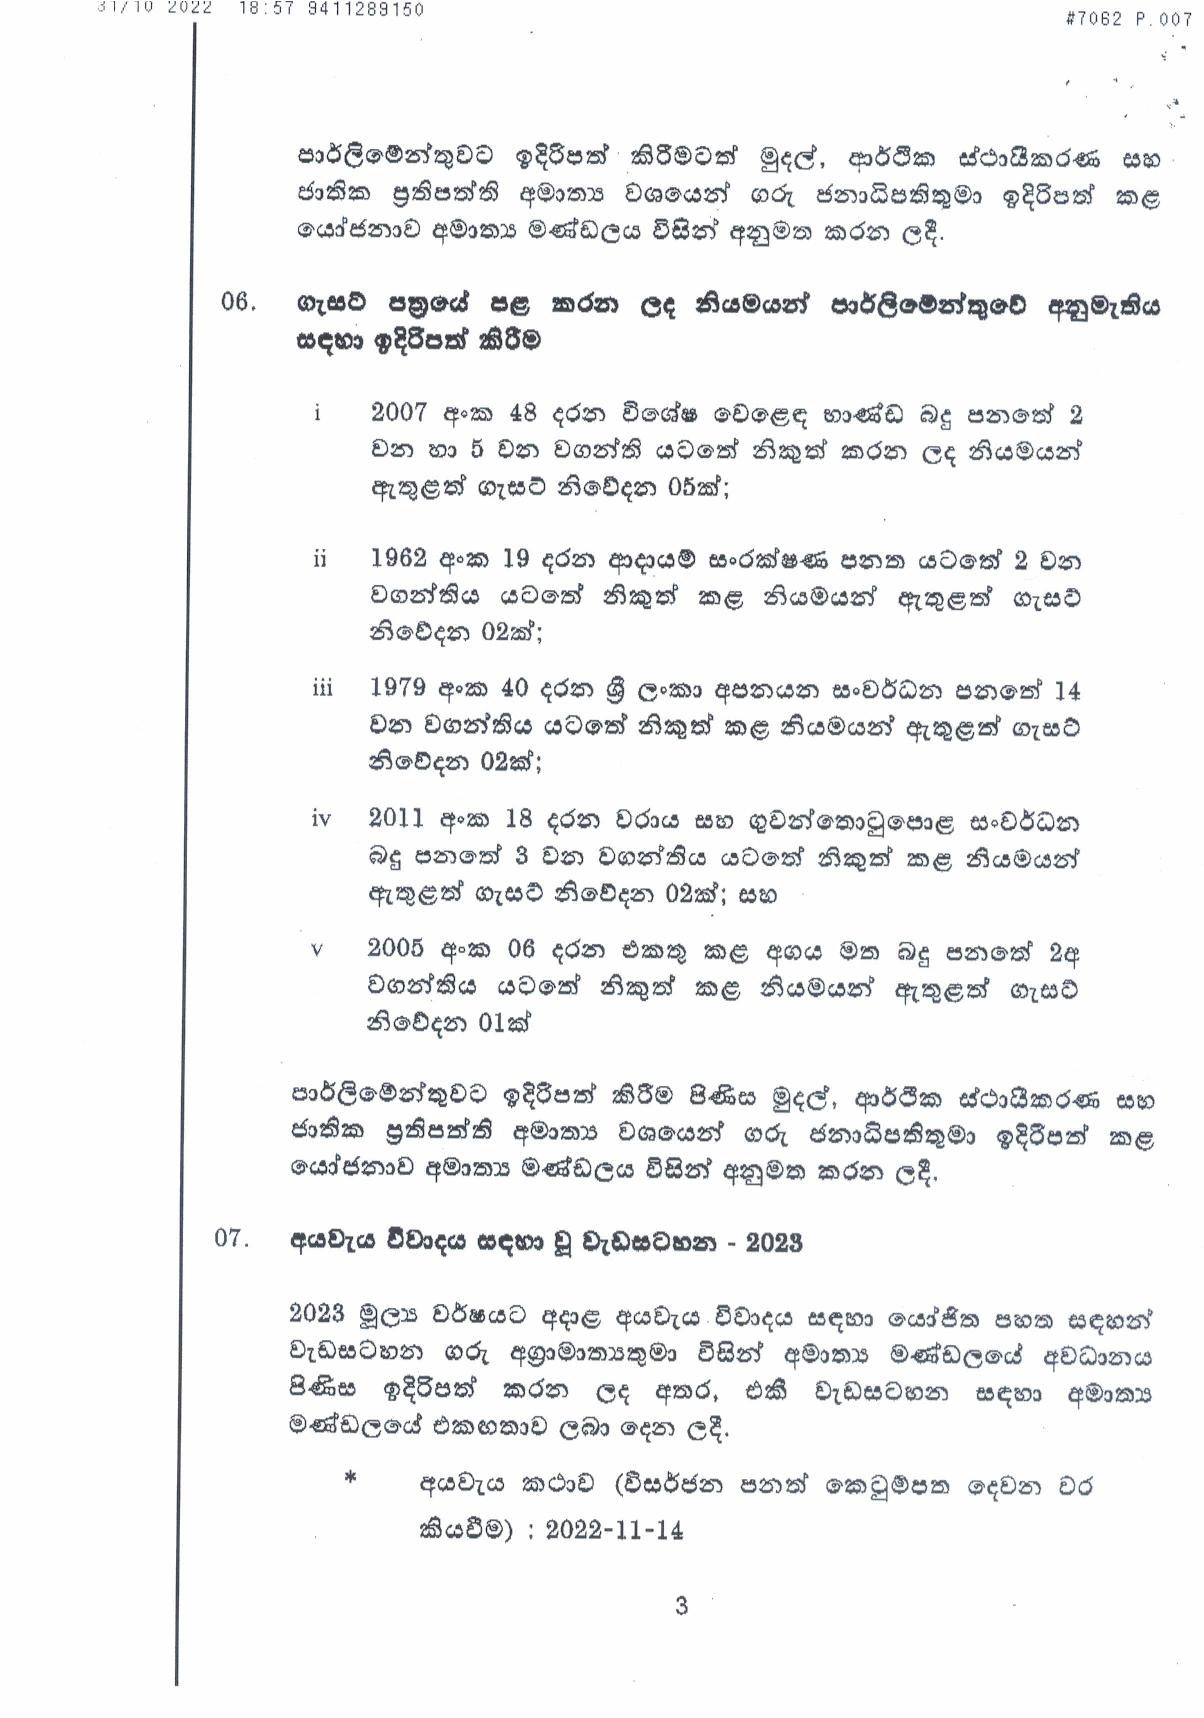 Cabinet Decisions on 31.10.2022 1 page 003